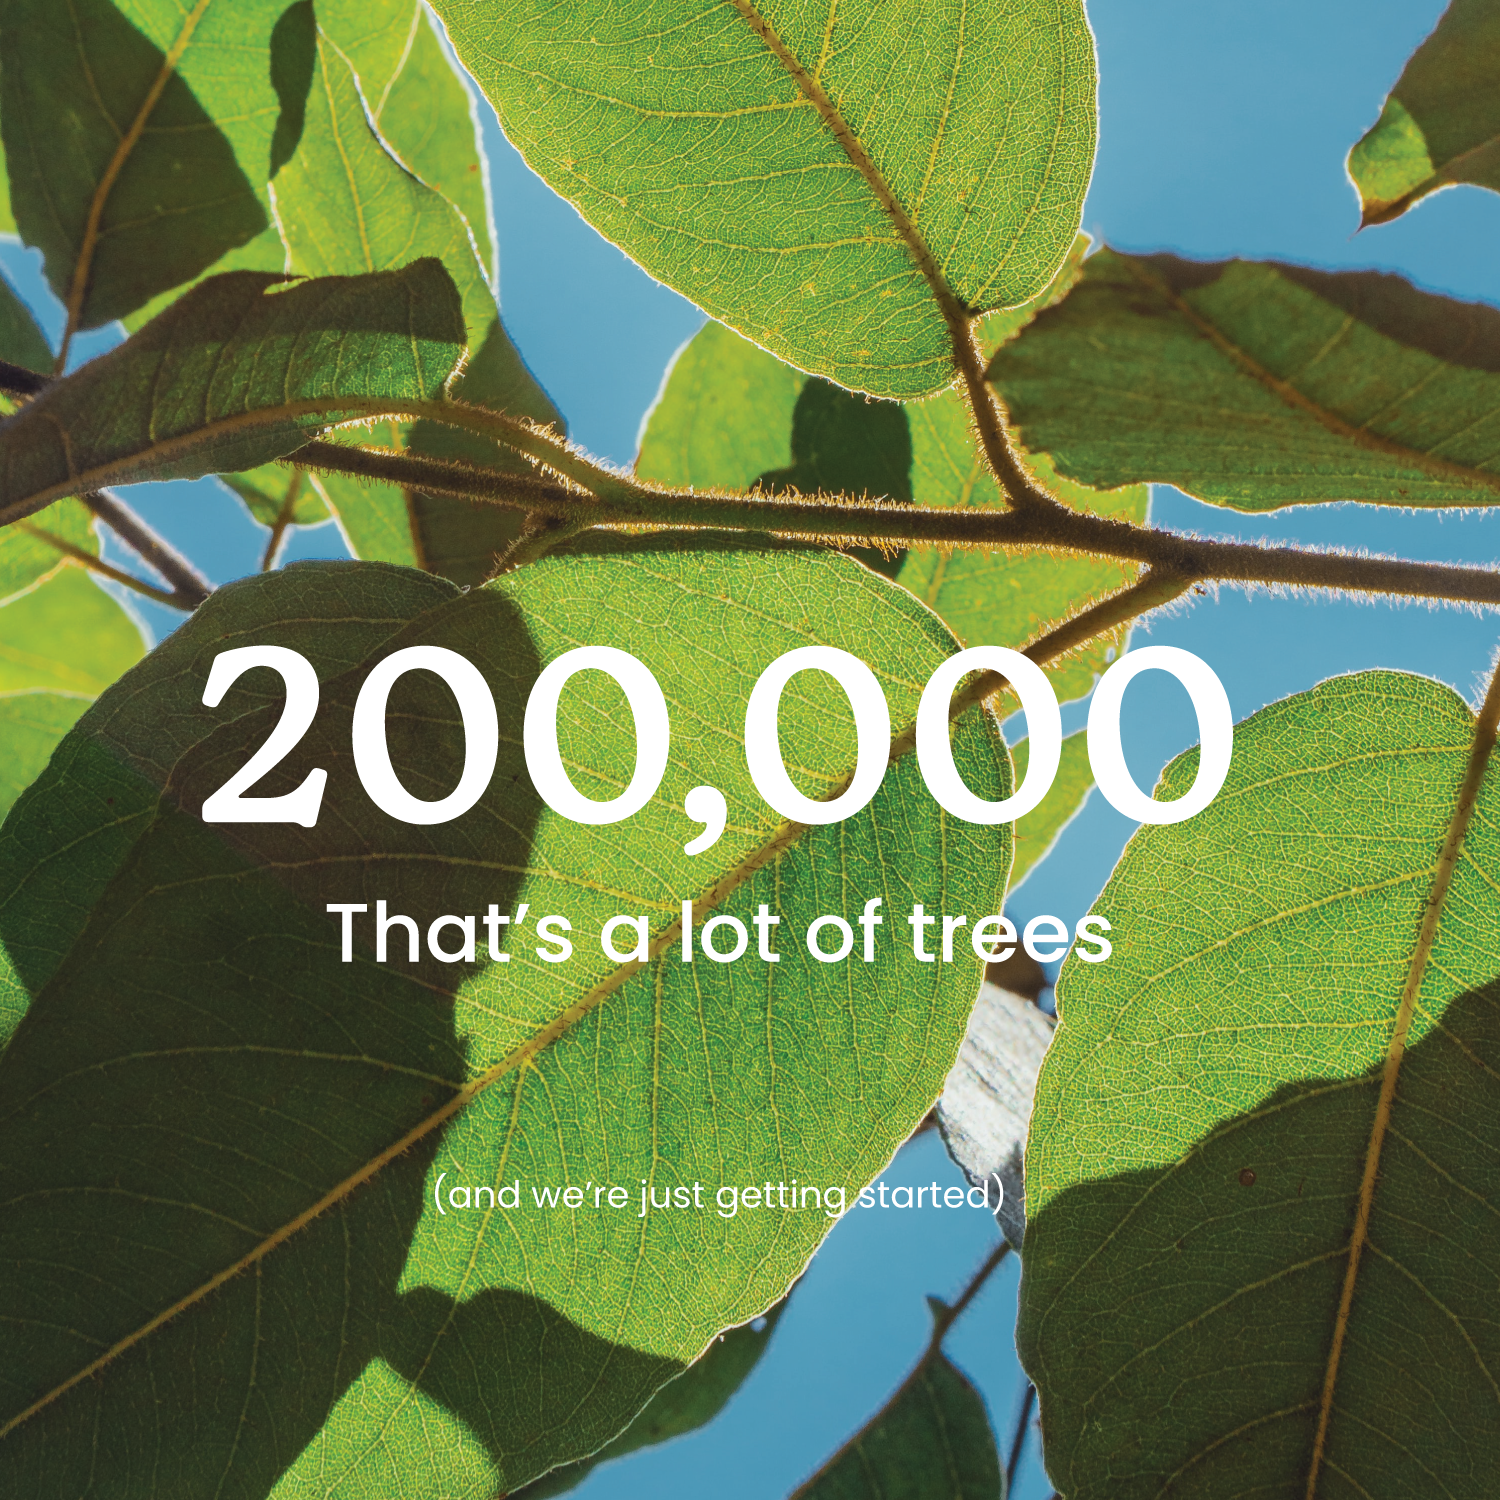 200,000 Trees Planted